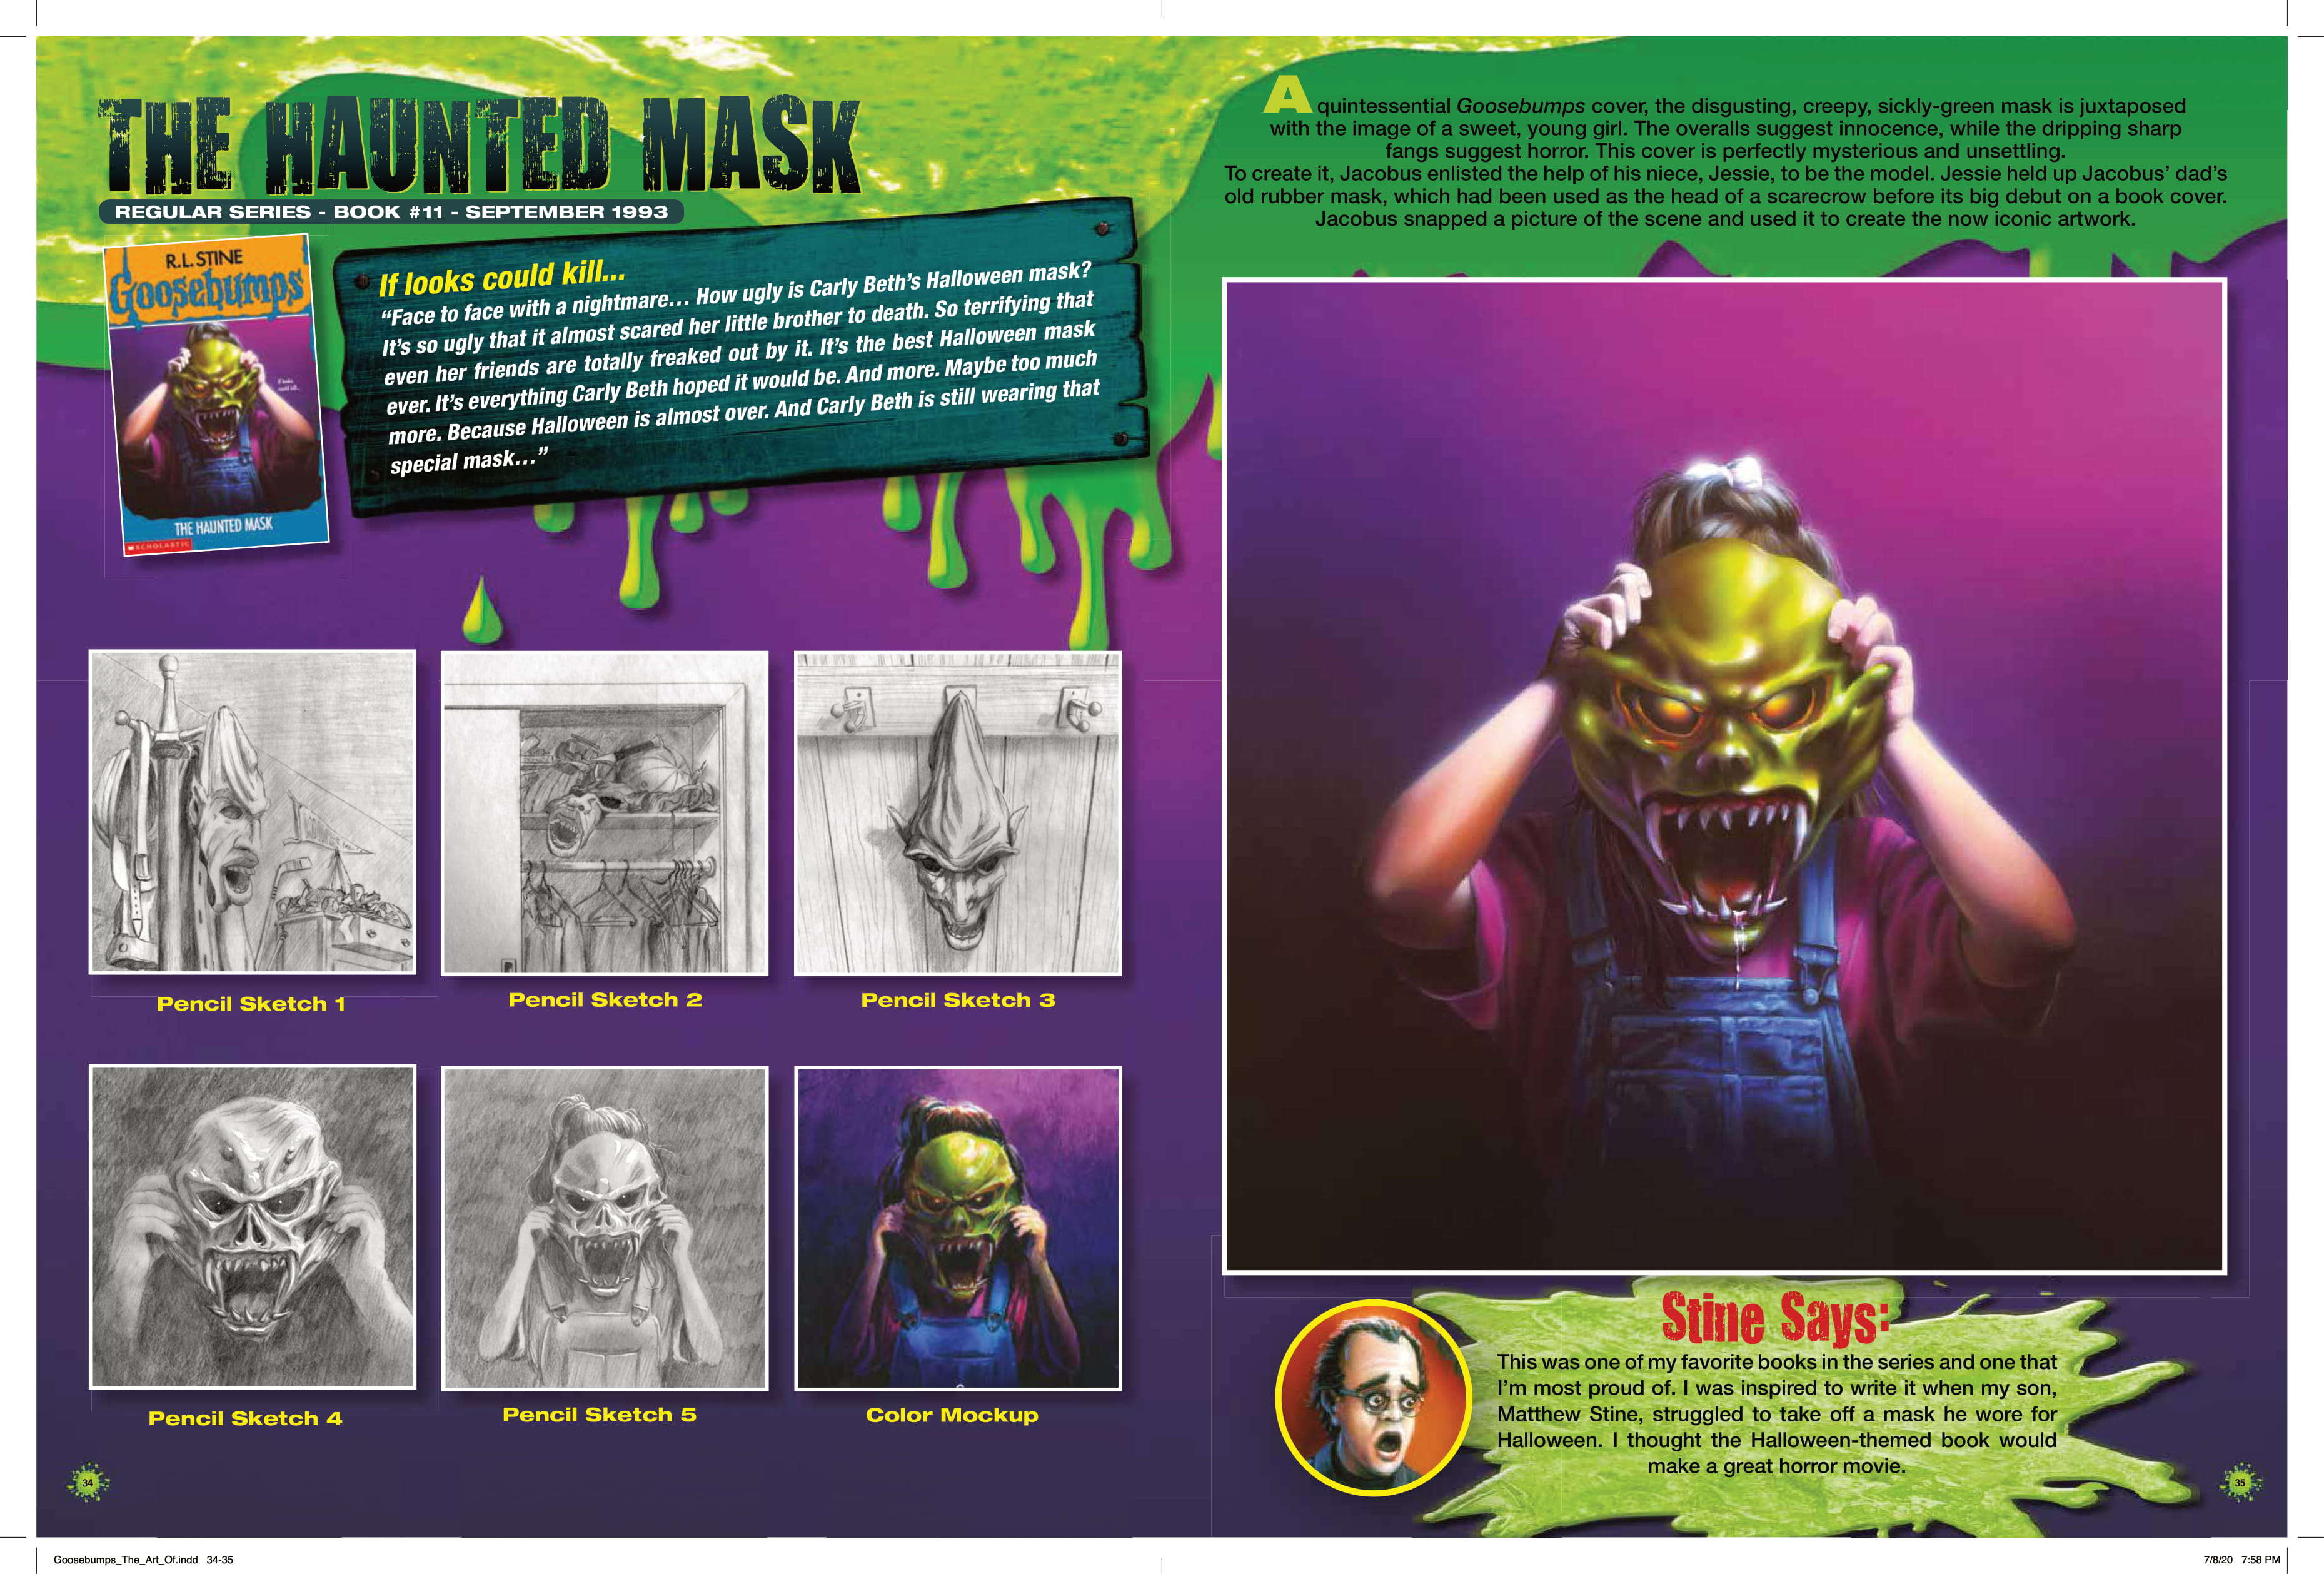 The Art of Goosebumps The Haunted Mask